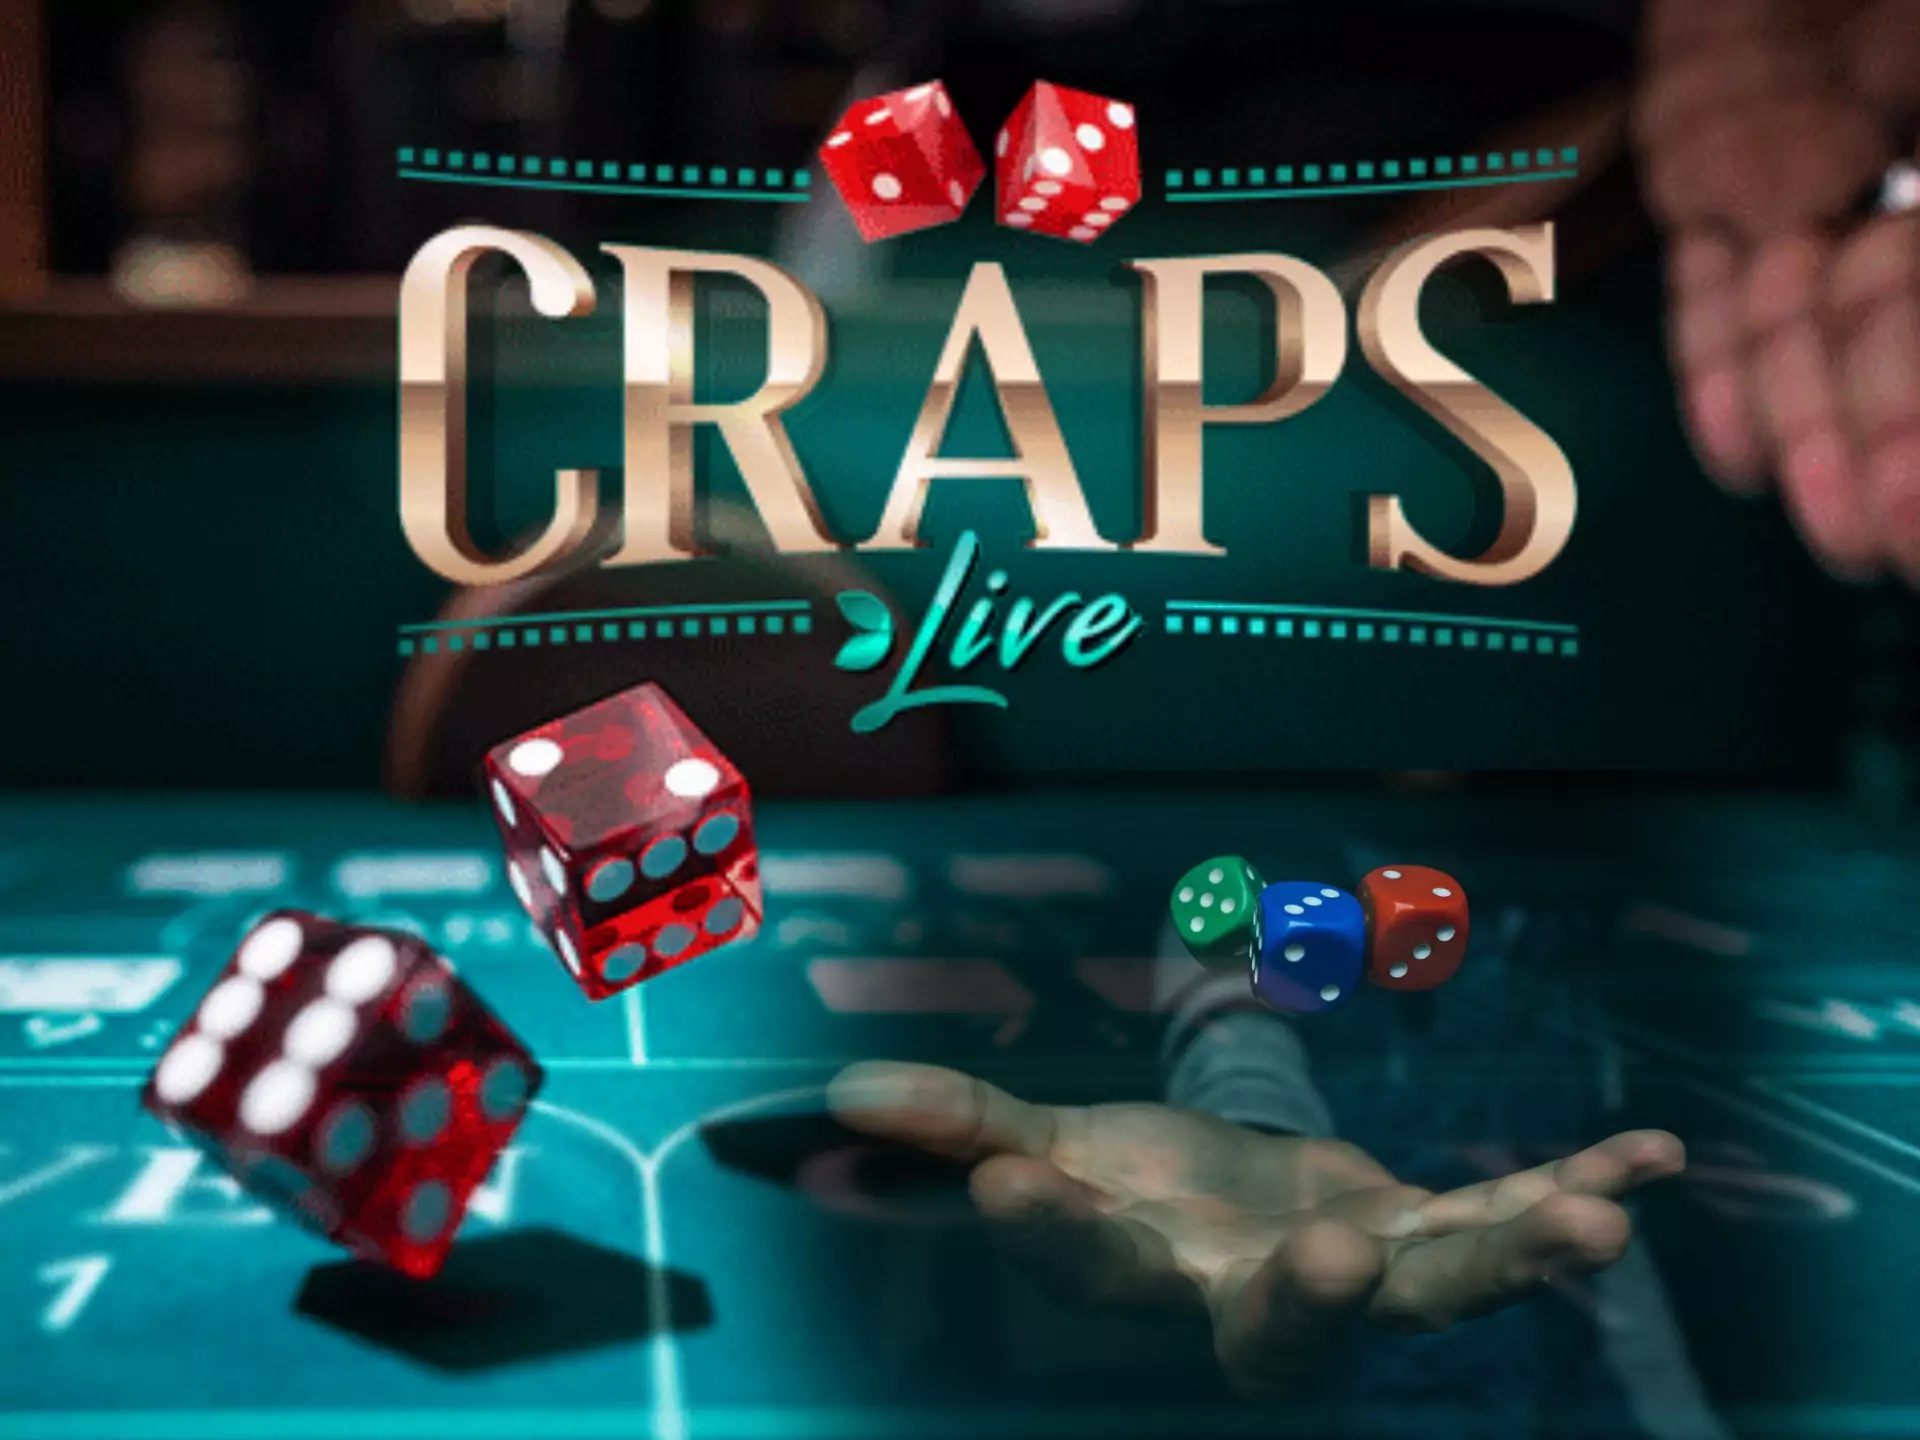 Learn more about dice combination and it's meaning in Craps.